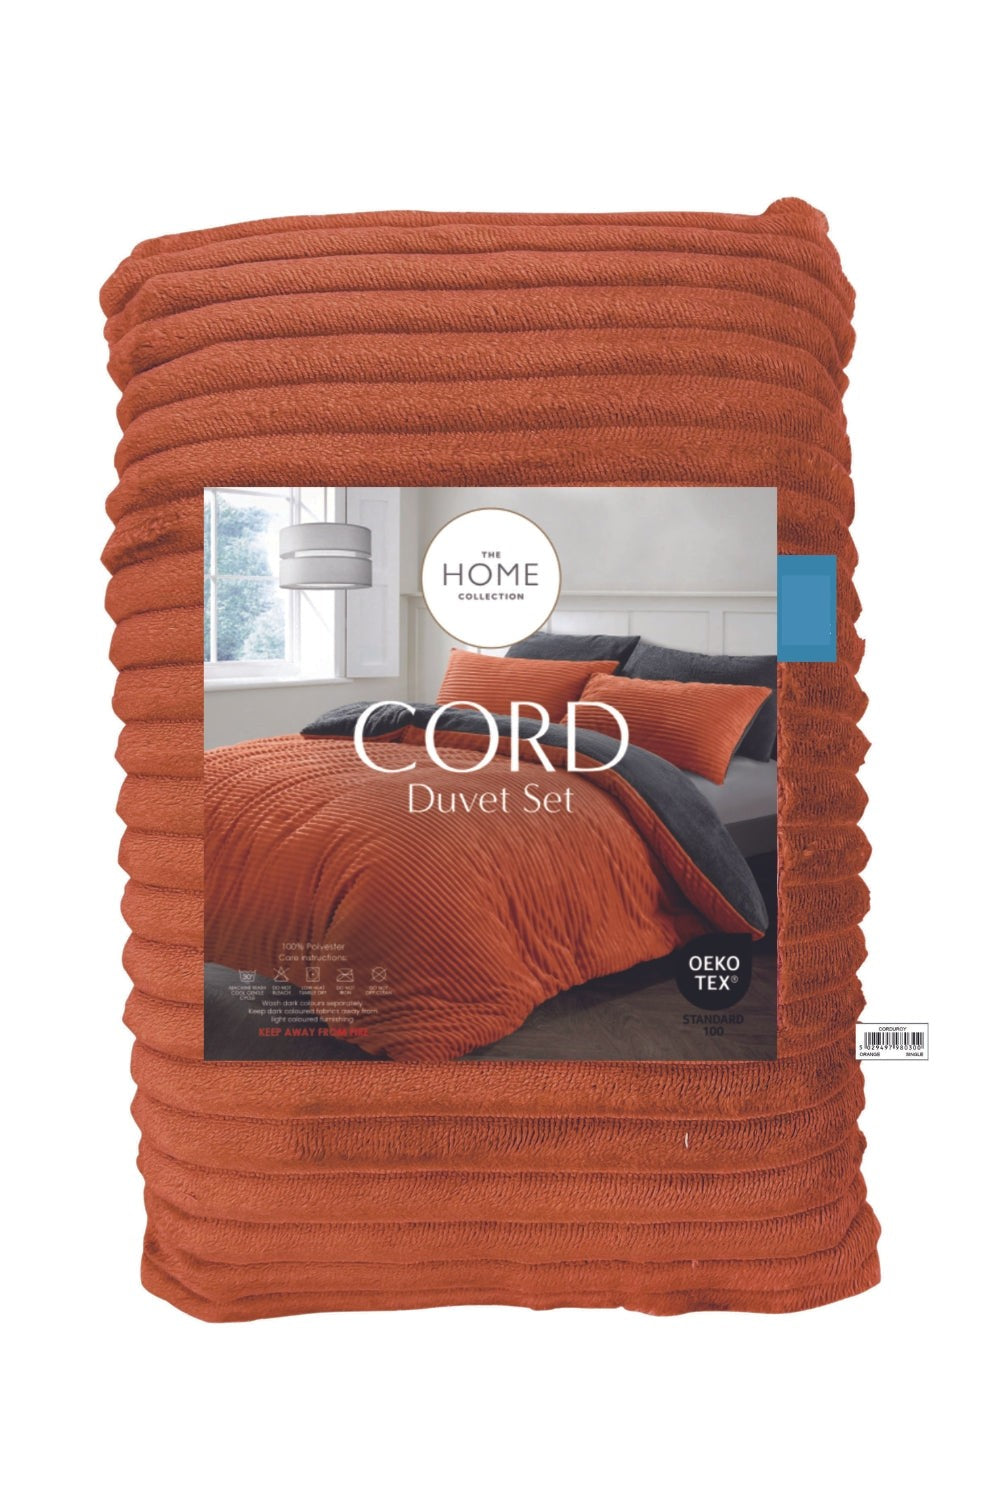  The Home Collection Cord Duvet Cover - Orange 2 Shaws Department Stores